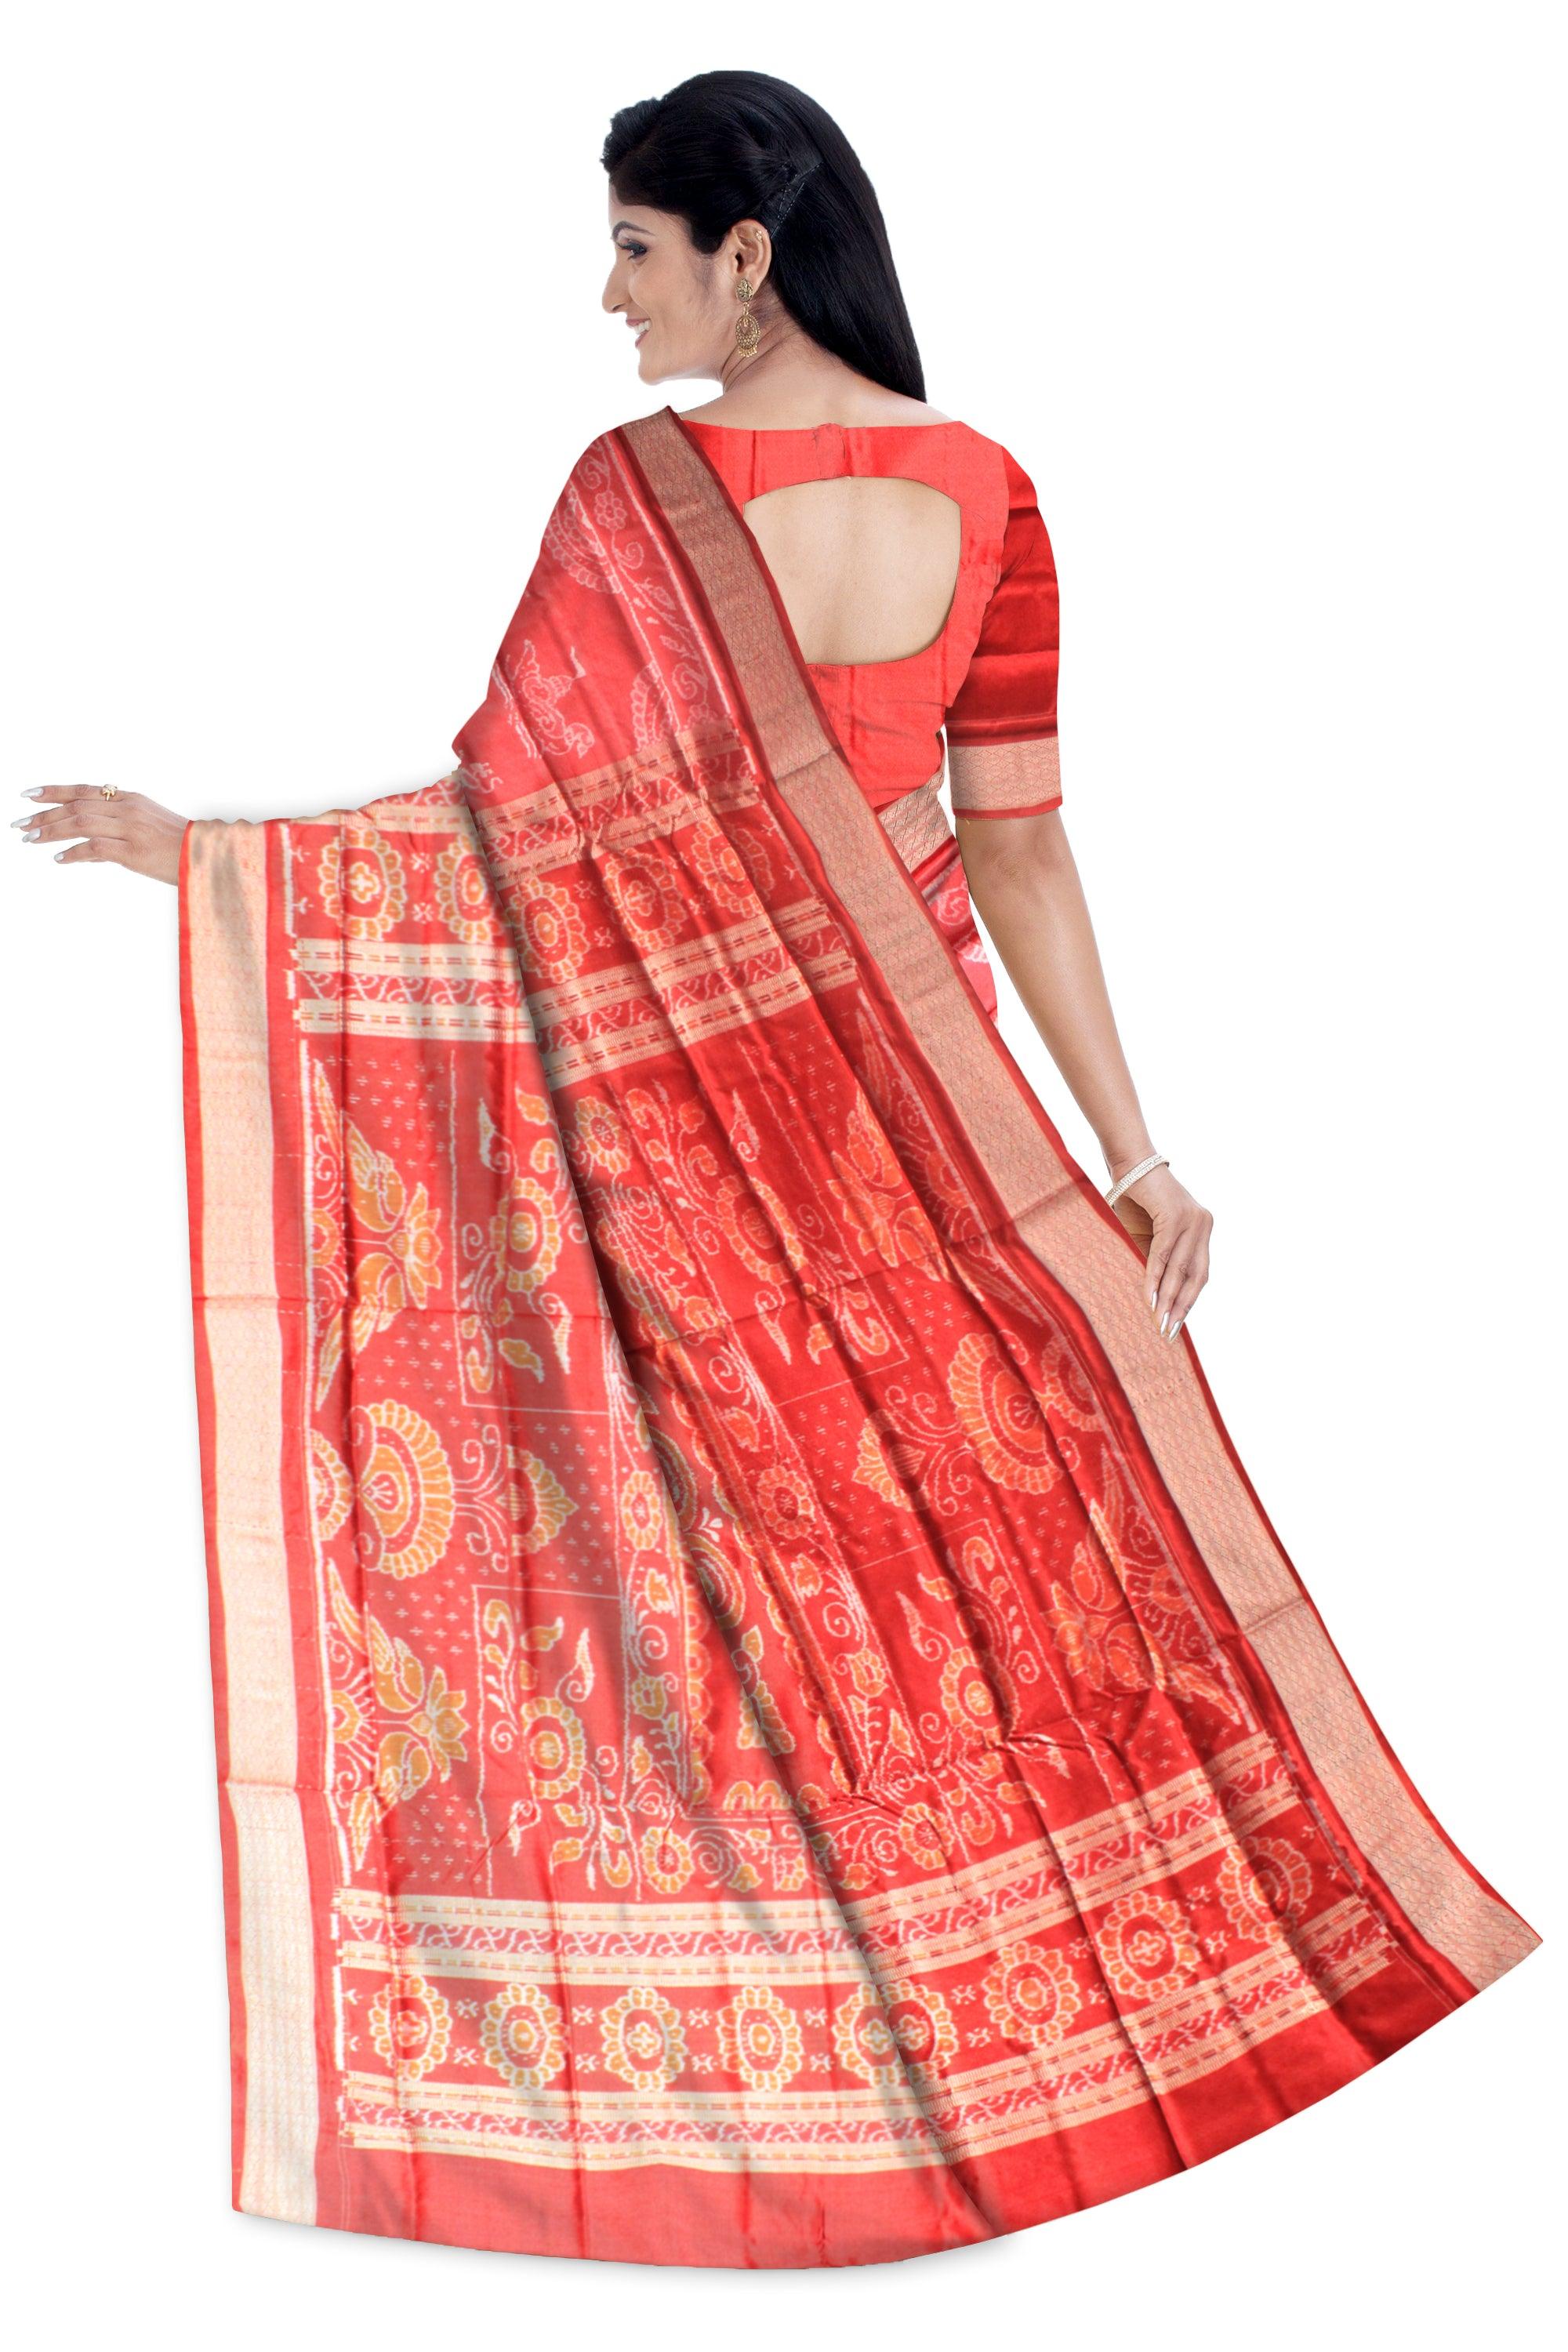 Authentic pata saree  in peacock design with red and pink color with blouse piece. - Koshali Arts & Crafts Enterprise